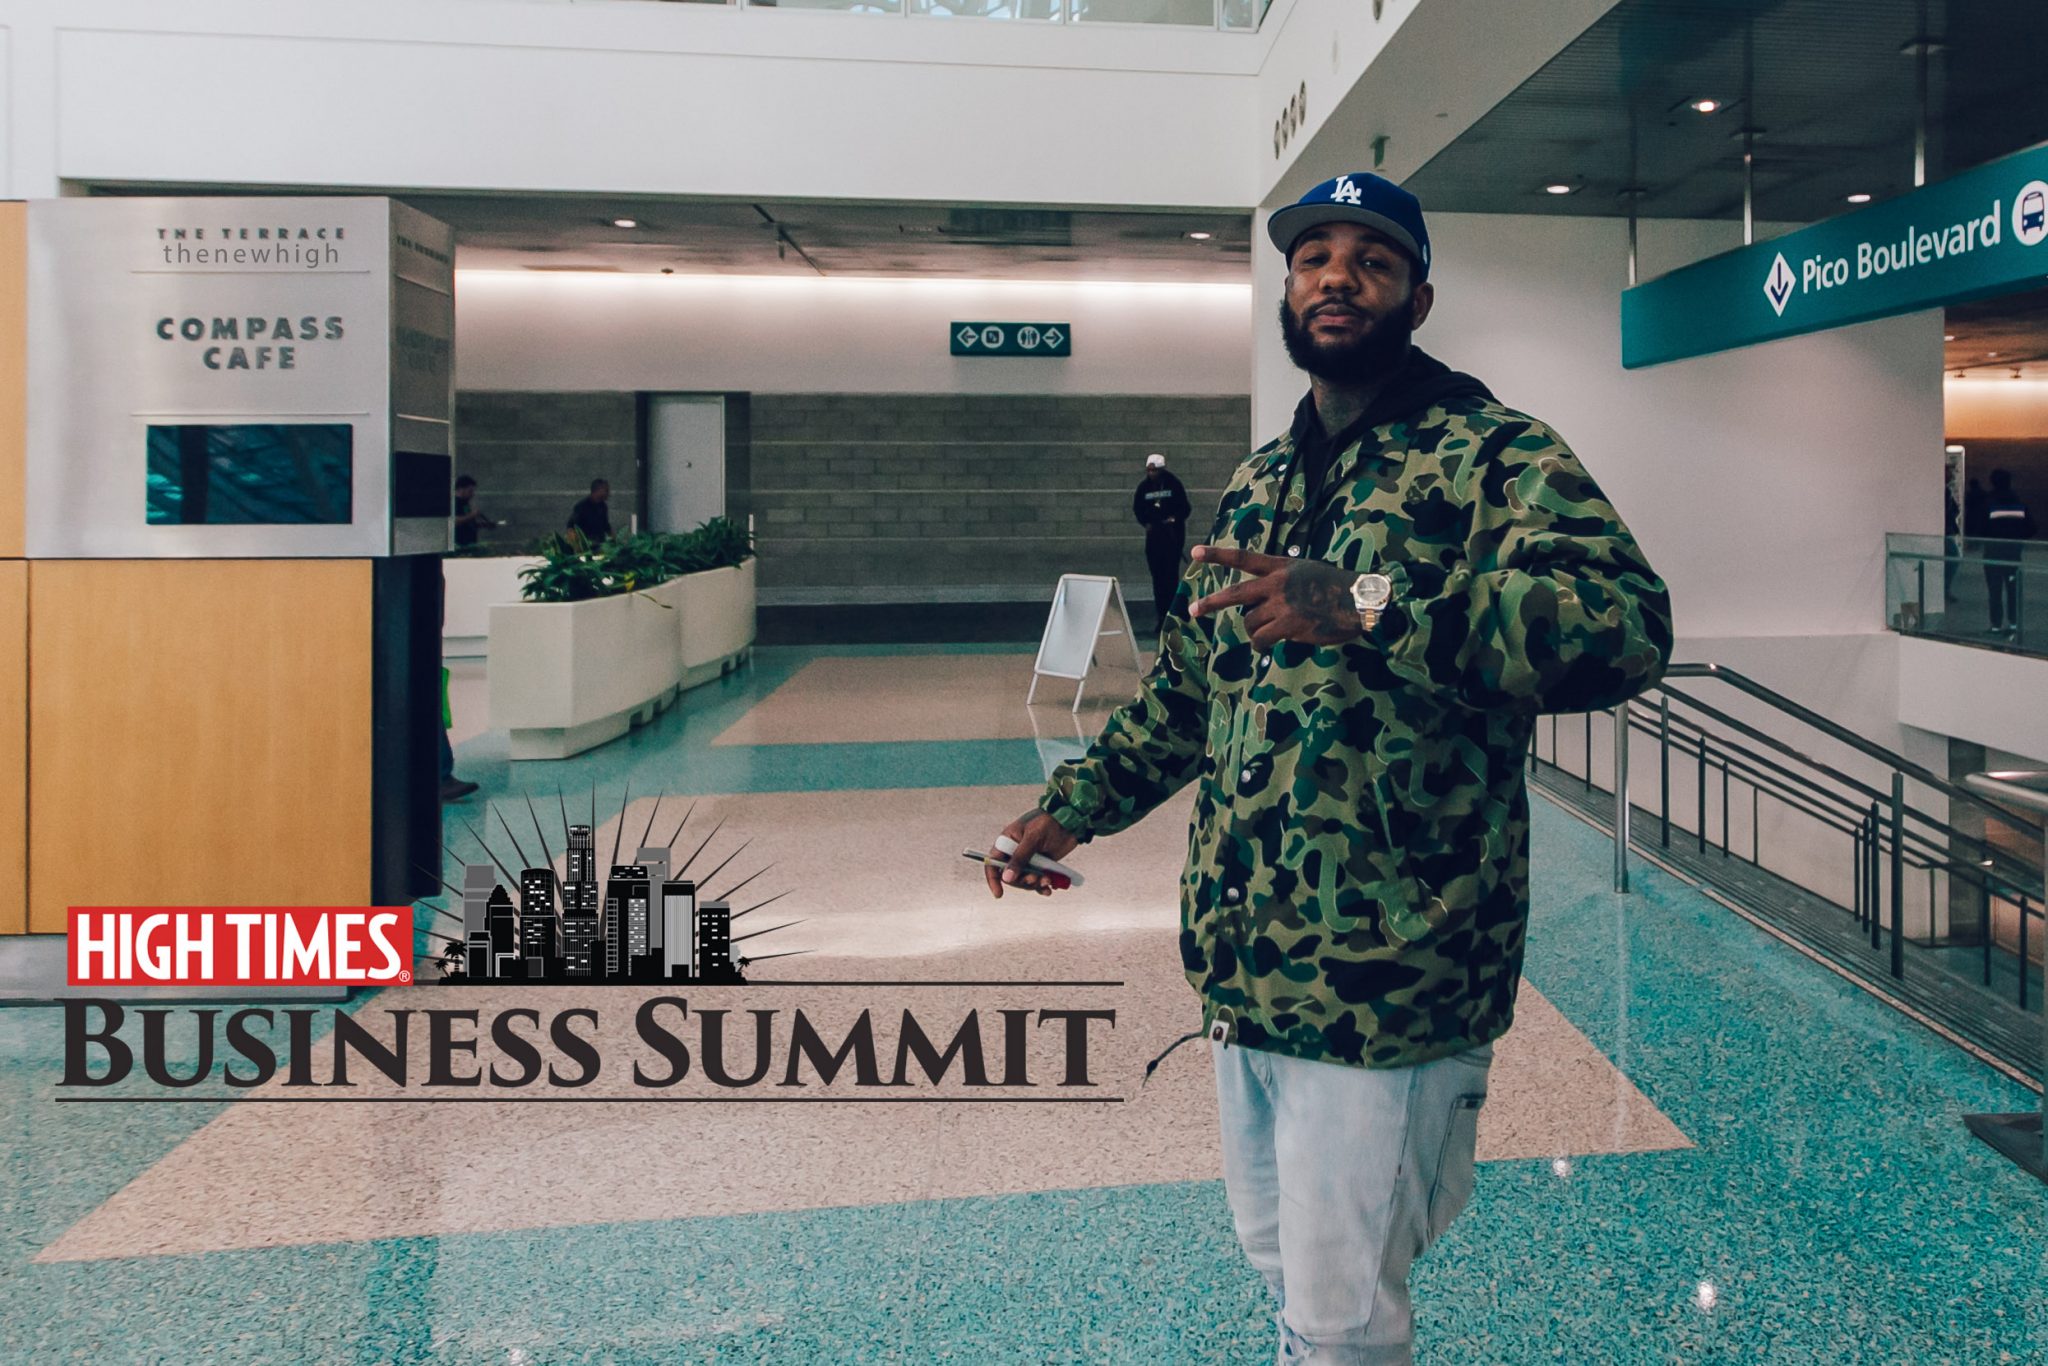 Who Were The Superstars at The High Times Business Summit?